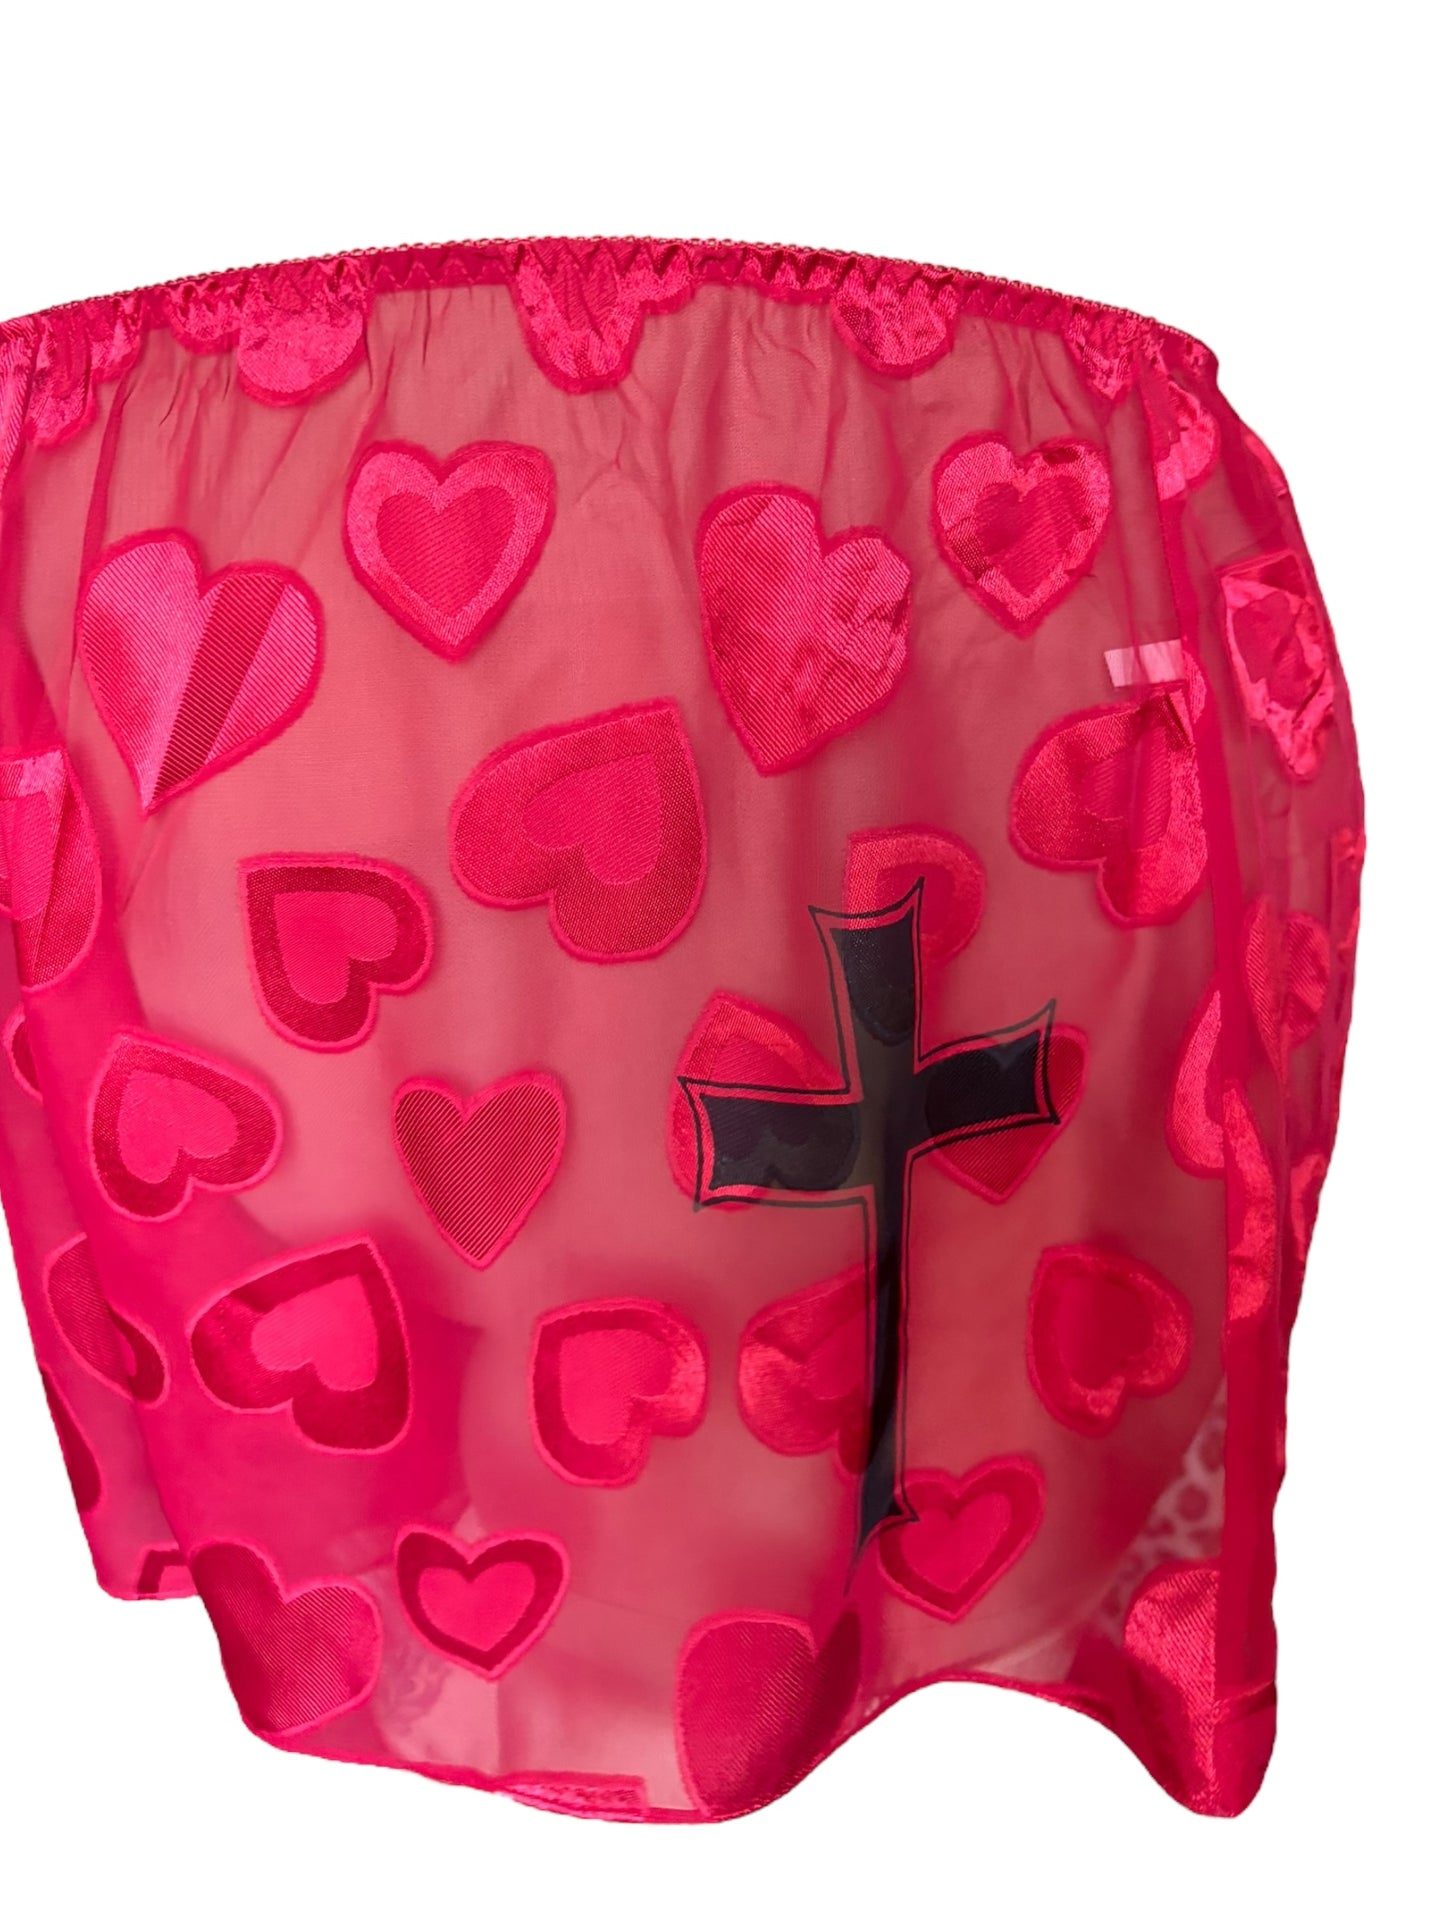 God Loves SInners Red Shorts - 3X/4X